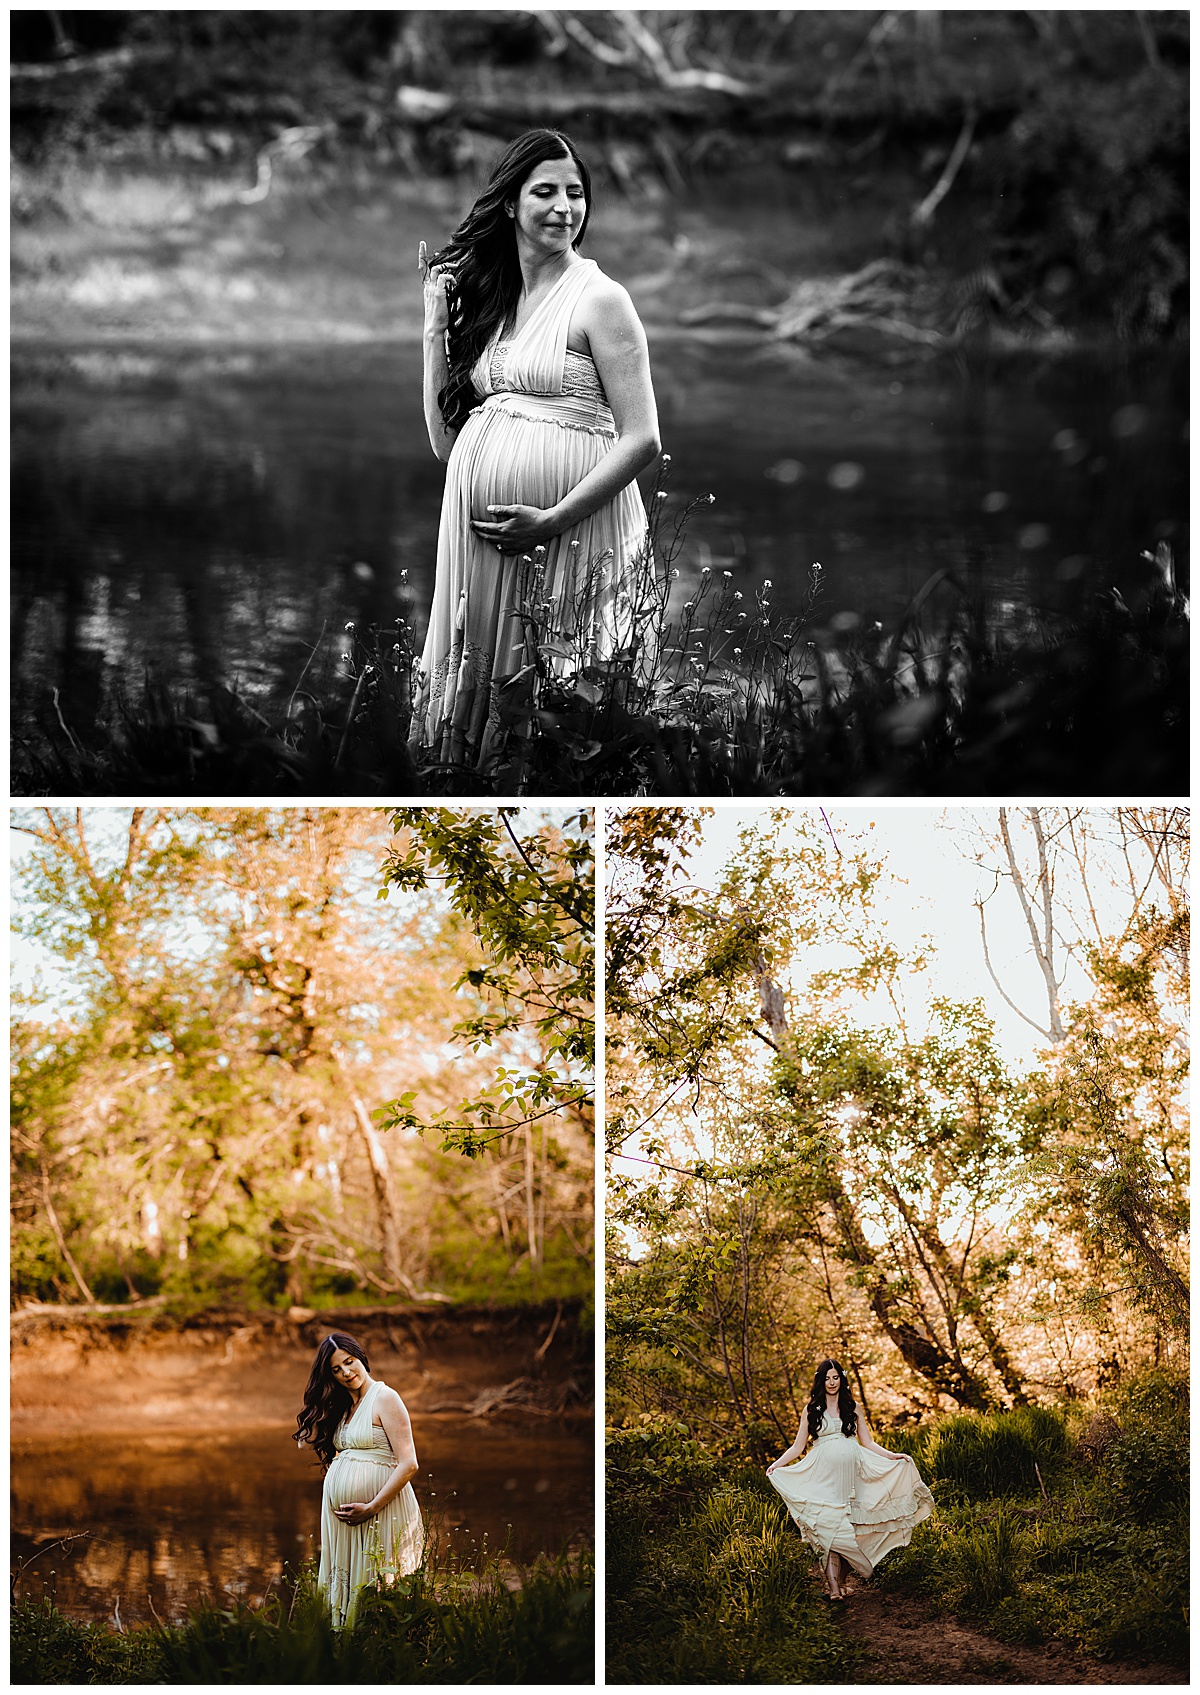 Mom looks down to pregnant belly during Motherhood Journey